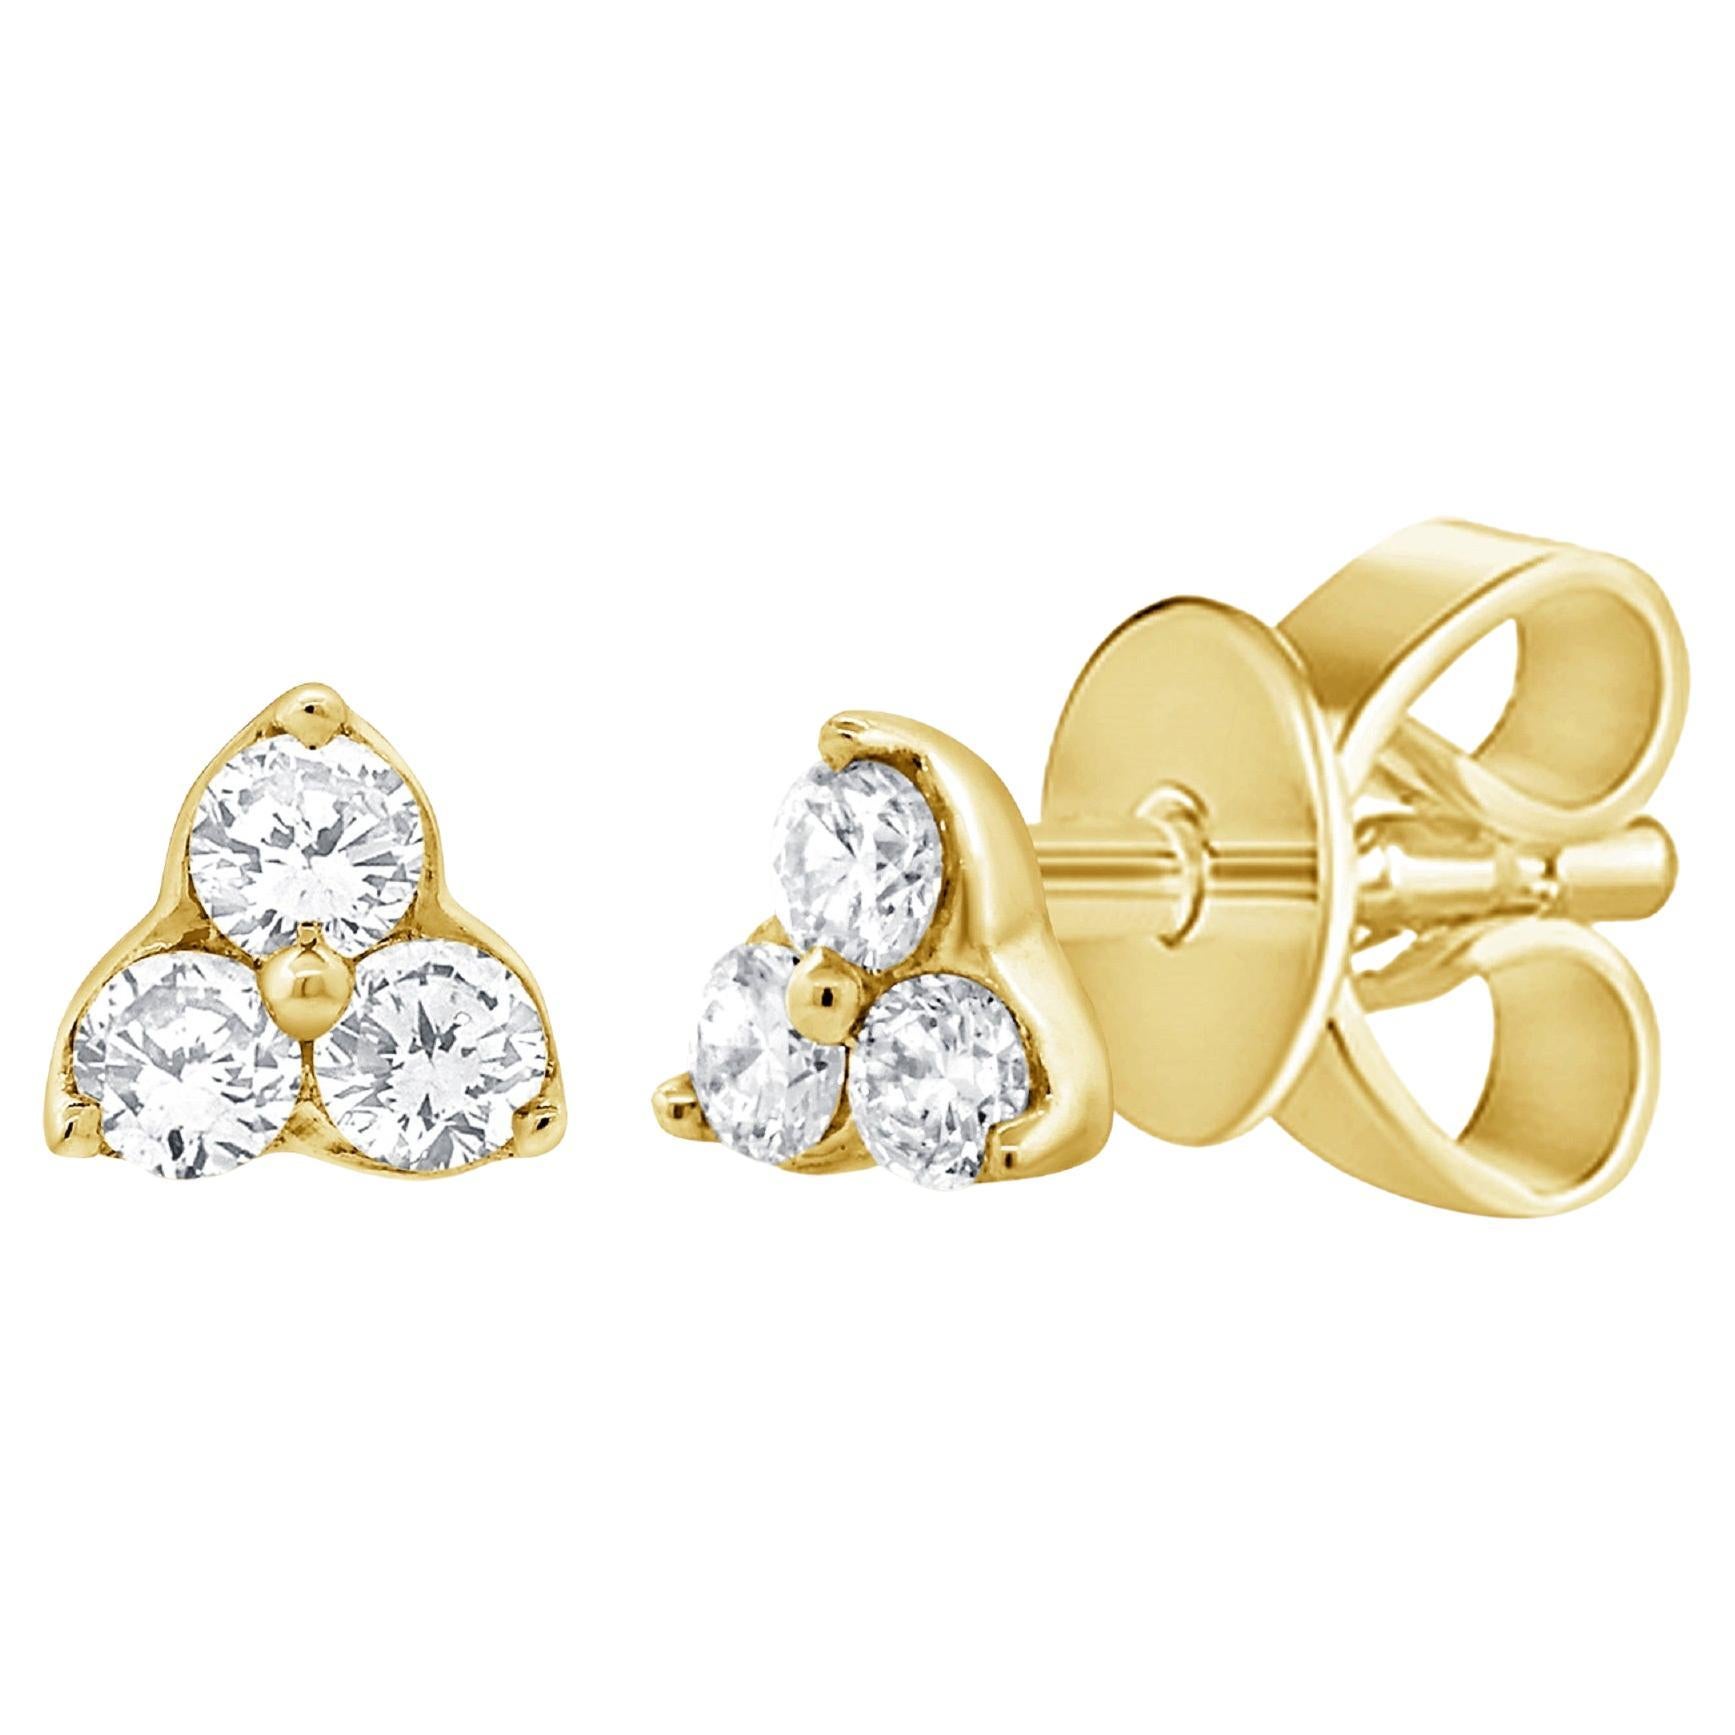 14K Yellow Gold 3 Stone 0.05ct Diamond Stud Earrings for Her For Sale